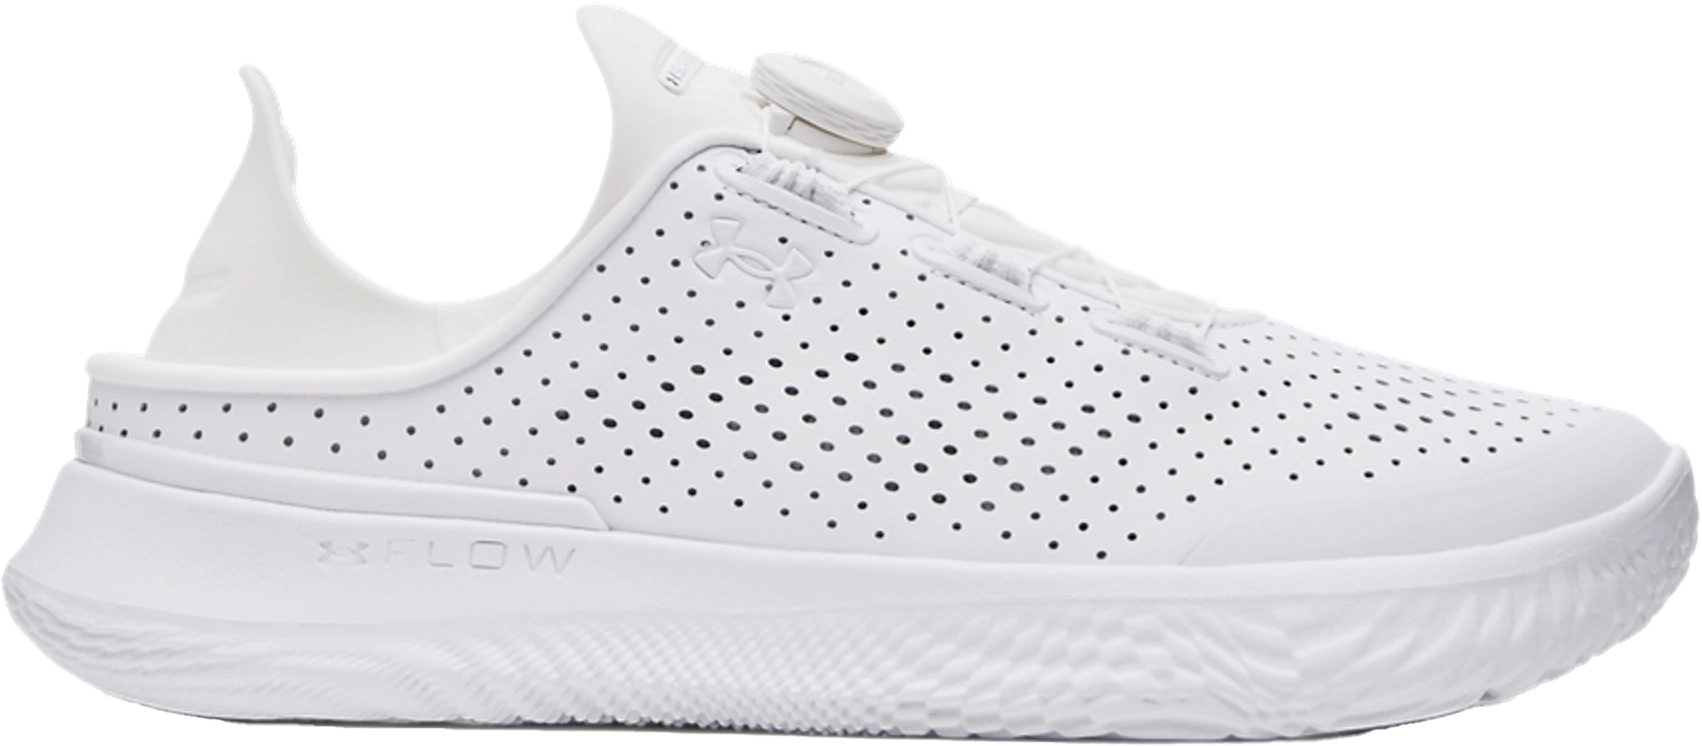 Scarpe fitness Under Armour UA Slipspeed Trainer SYN-WHT